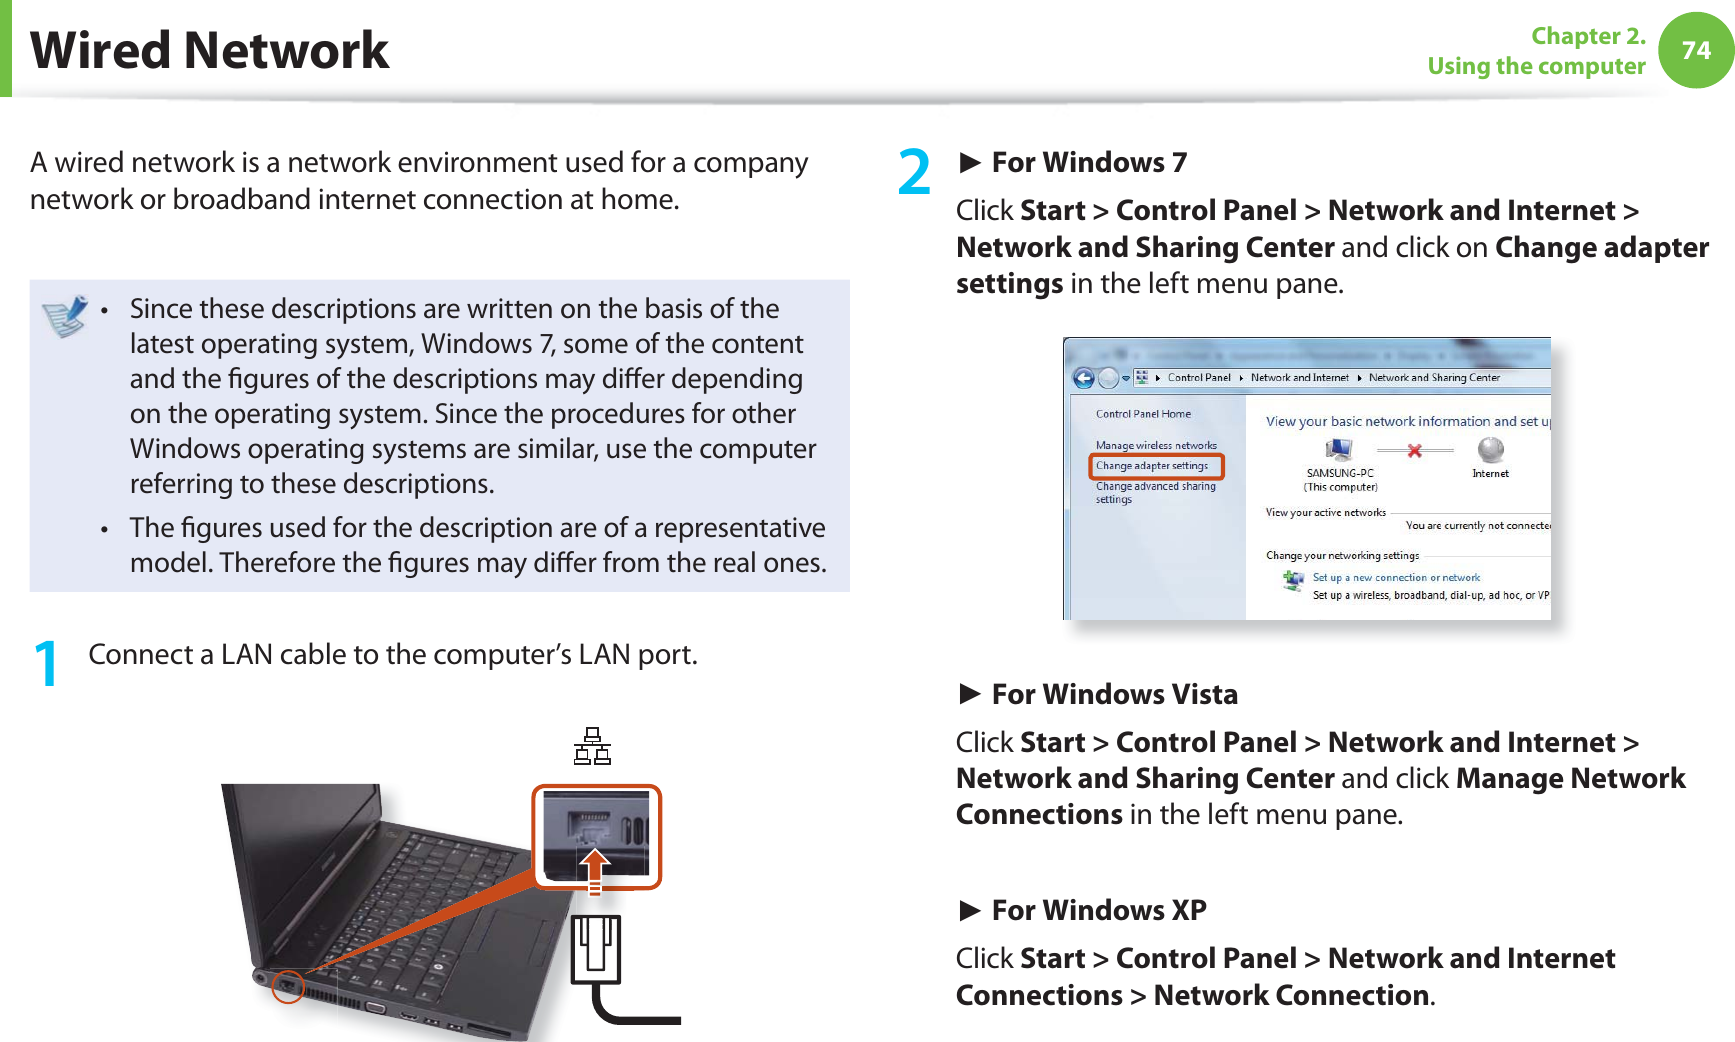 74Chapter 2. Using the computer Wired  NetworkA wired network is a network environment used for a company network or broadband internet connection at home.Since these descriptions are written on the basis of the t latest operating system, Windows 7, some of the content and the ﬁ gures of the descriptions may diﬀ er depending on the operating system. Since the procedures for other Windows operating systems are similar, use the computer referring to these descriptions.The ﬁ gures used for the description are of a representative t model. Therefore the ﬁ gures may diﬀ er from the real ones.1  Connect a LAN cable to the computer’s LAN port.2 ► For Windows 7Click Start &gt; Control Panel &gt; Network and Internet &gt; Network and Sharing Center and click on Change adapter settings in the left menu pane.► For Windows VistaClick Start &gt; Control Panel &gt; Network and Internet &gt; Network and Sharing Center and click Manage Network Connections in the left menu pane.► For Windows XPClick Start &gt; Control Panel &gt; Network and Internet Connections &gt; Network Connection.